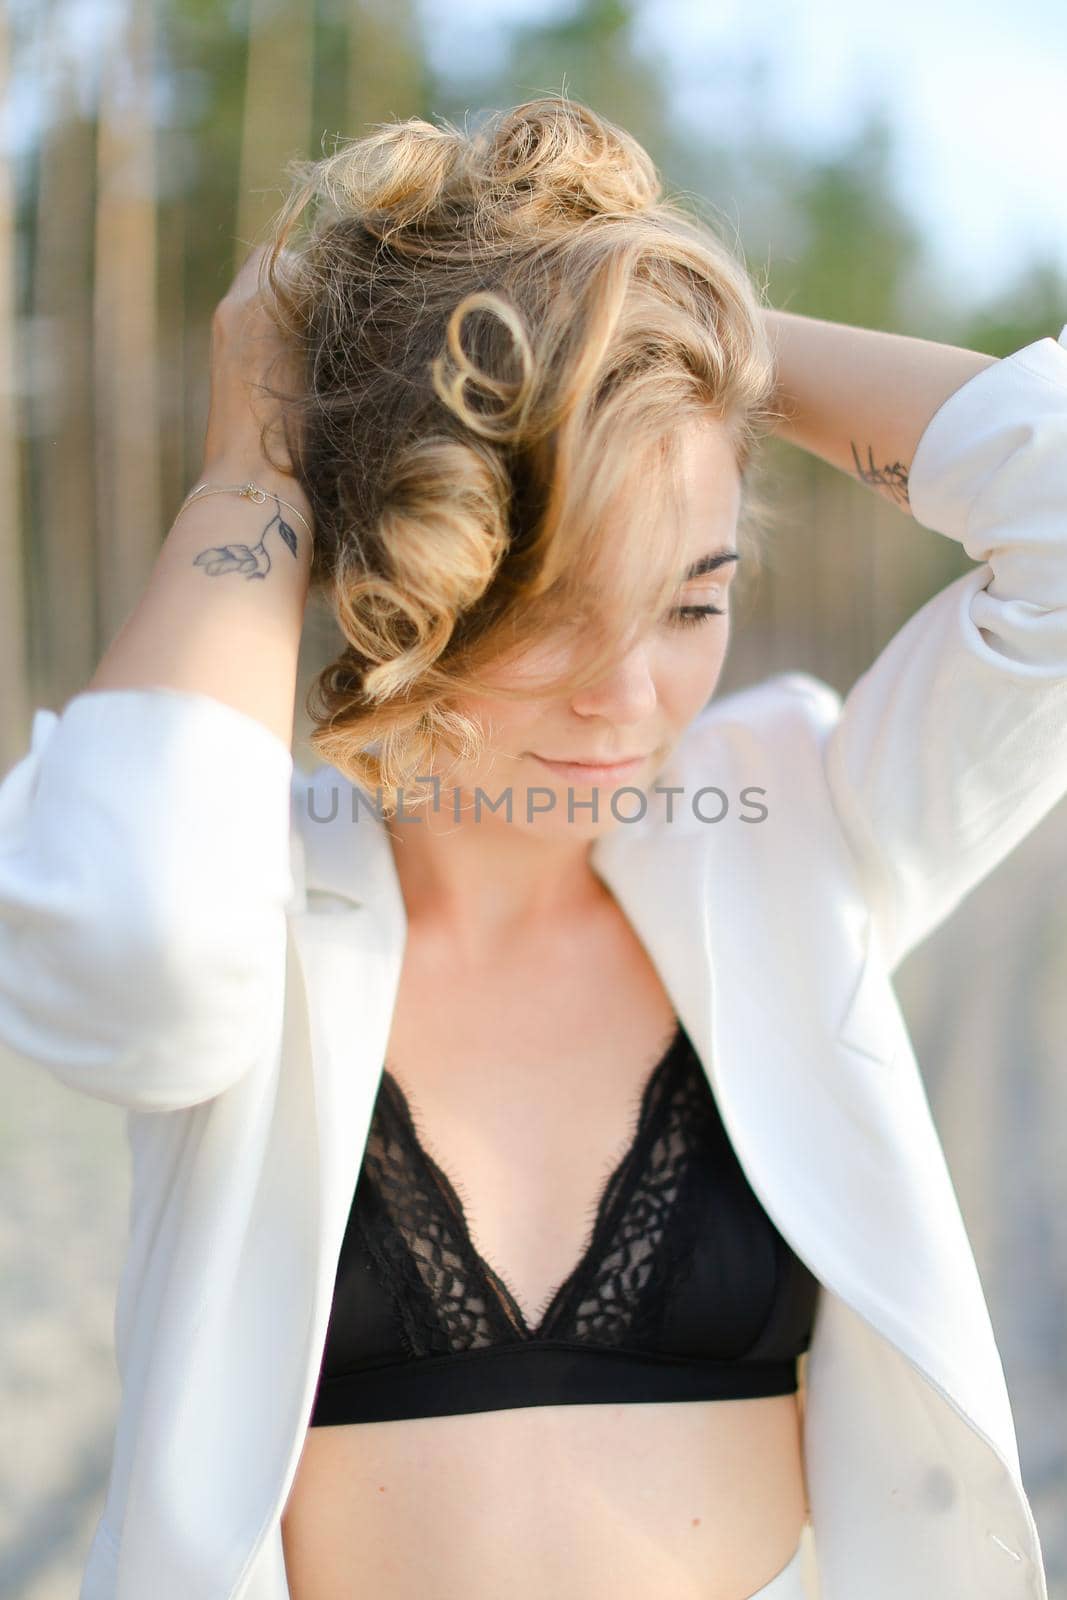 Portraint of young woman with little hand tattoo wearing white shirt and black bra. by sisterspro